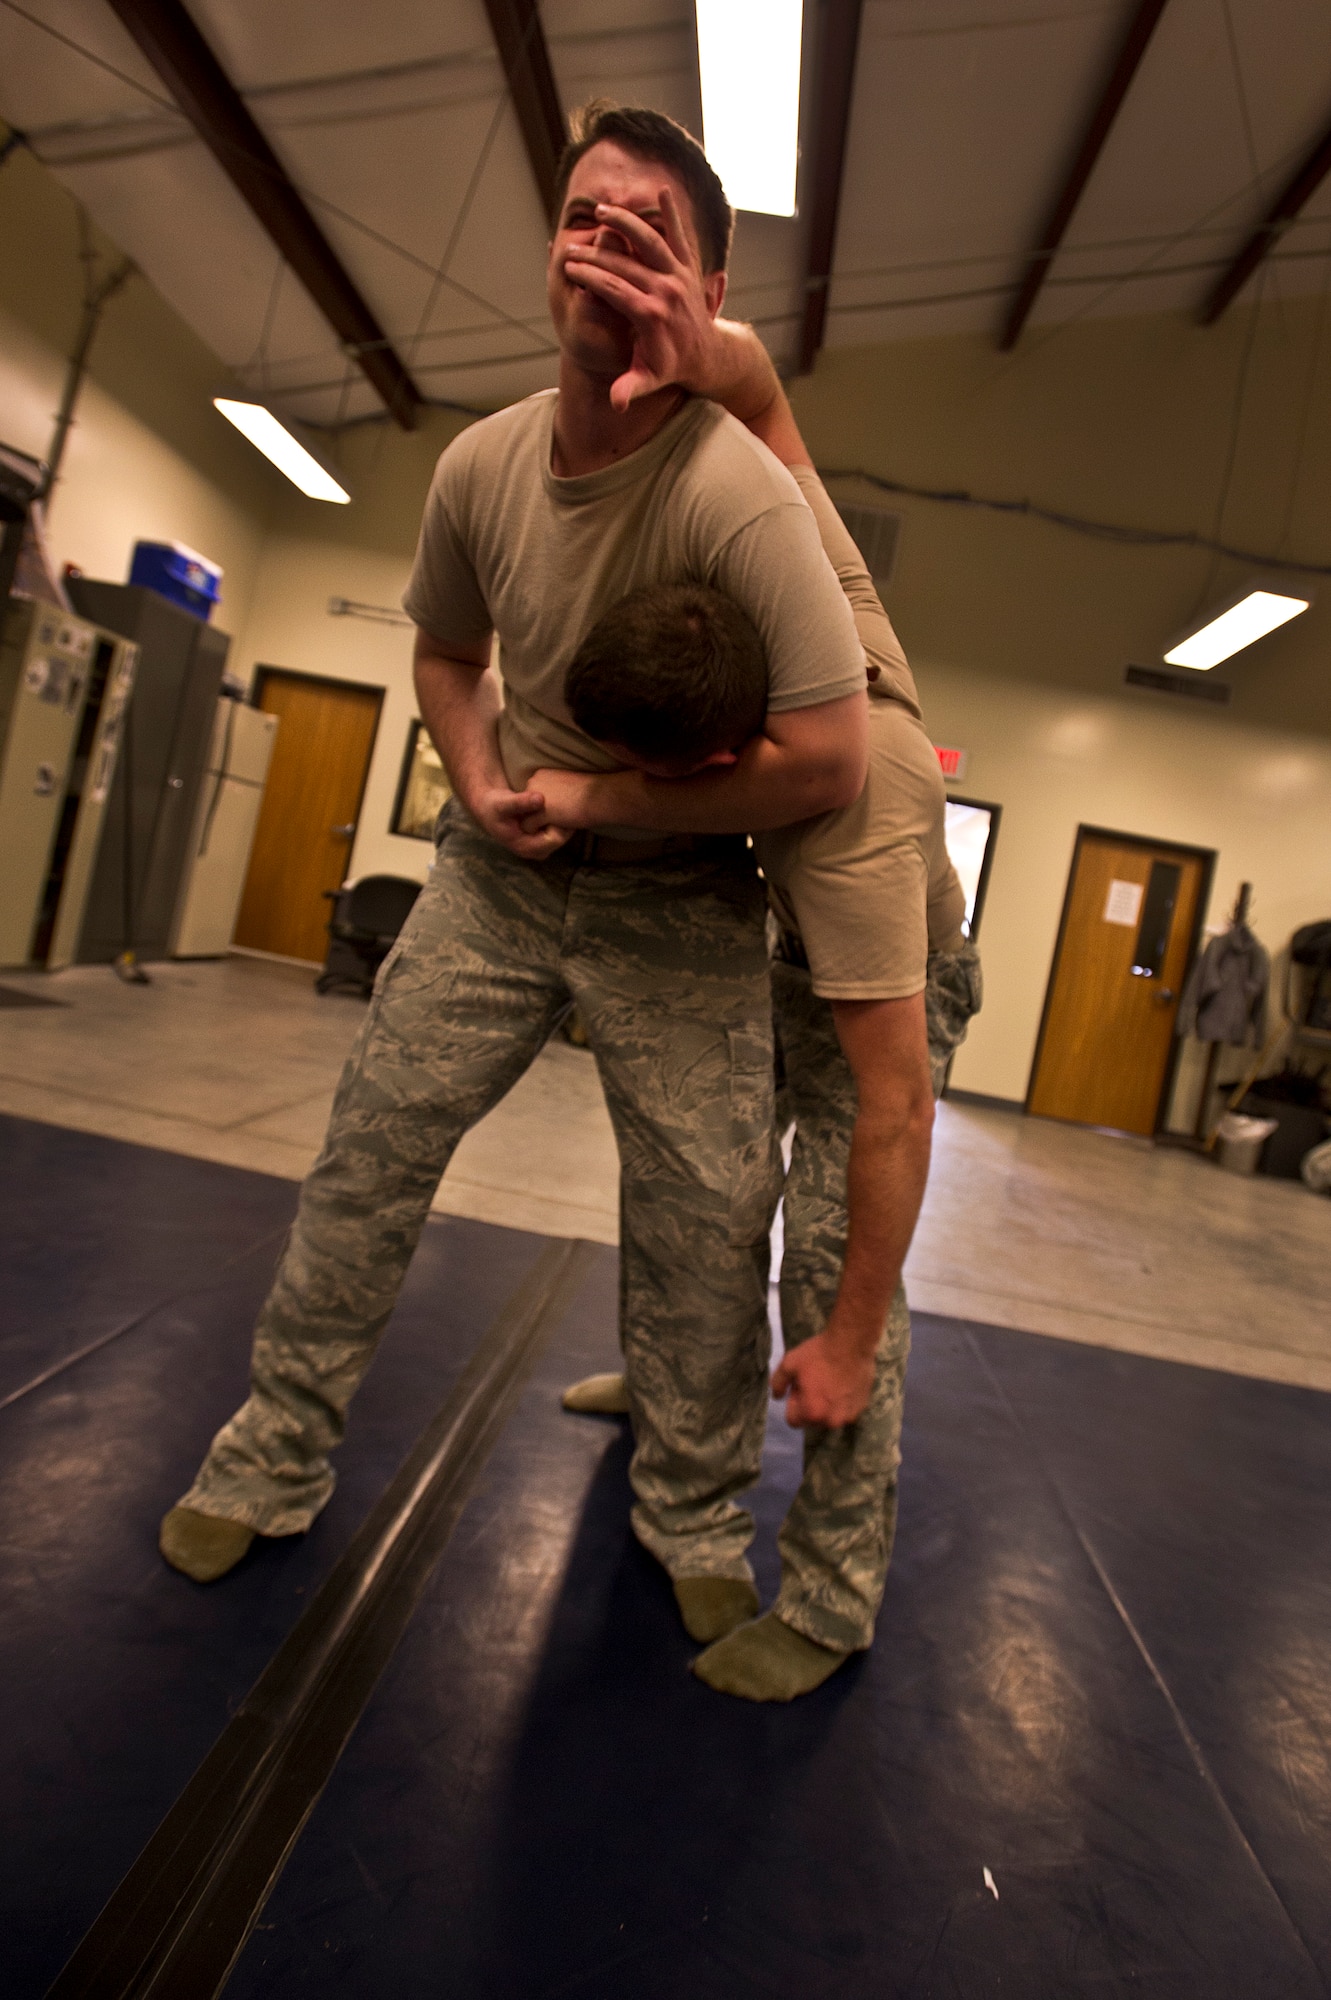 Senior Airman Stephen Strickland and Senior Airman Curtis March, 628th Security Forces Squadron patrolmen, grapple each other during Personal Apprehension Restraint Techniques and Mechanical Advantage Control Hold training at the combat arms building on Joint Base Charleston - Air Base, S.C., June 5, 2012. The training is an annual requirement for the Airmen in case of a physical situation while on duty. (U.S. Air Force photo by Airman 1st Class George Goslin)